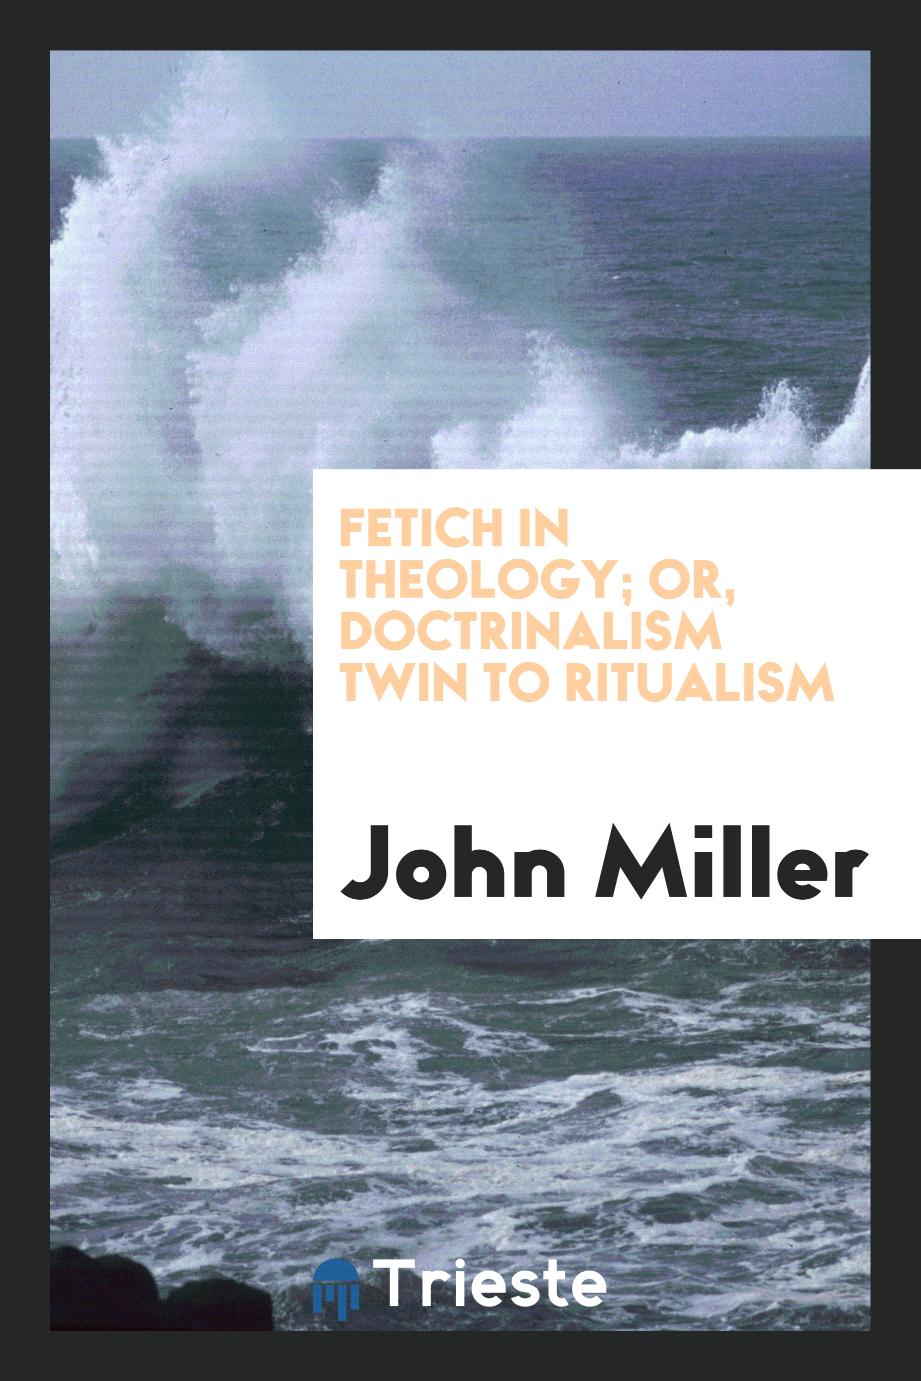 Fetich in theology; or, doctrinalism twin to ritualism